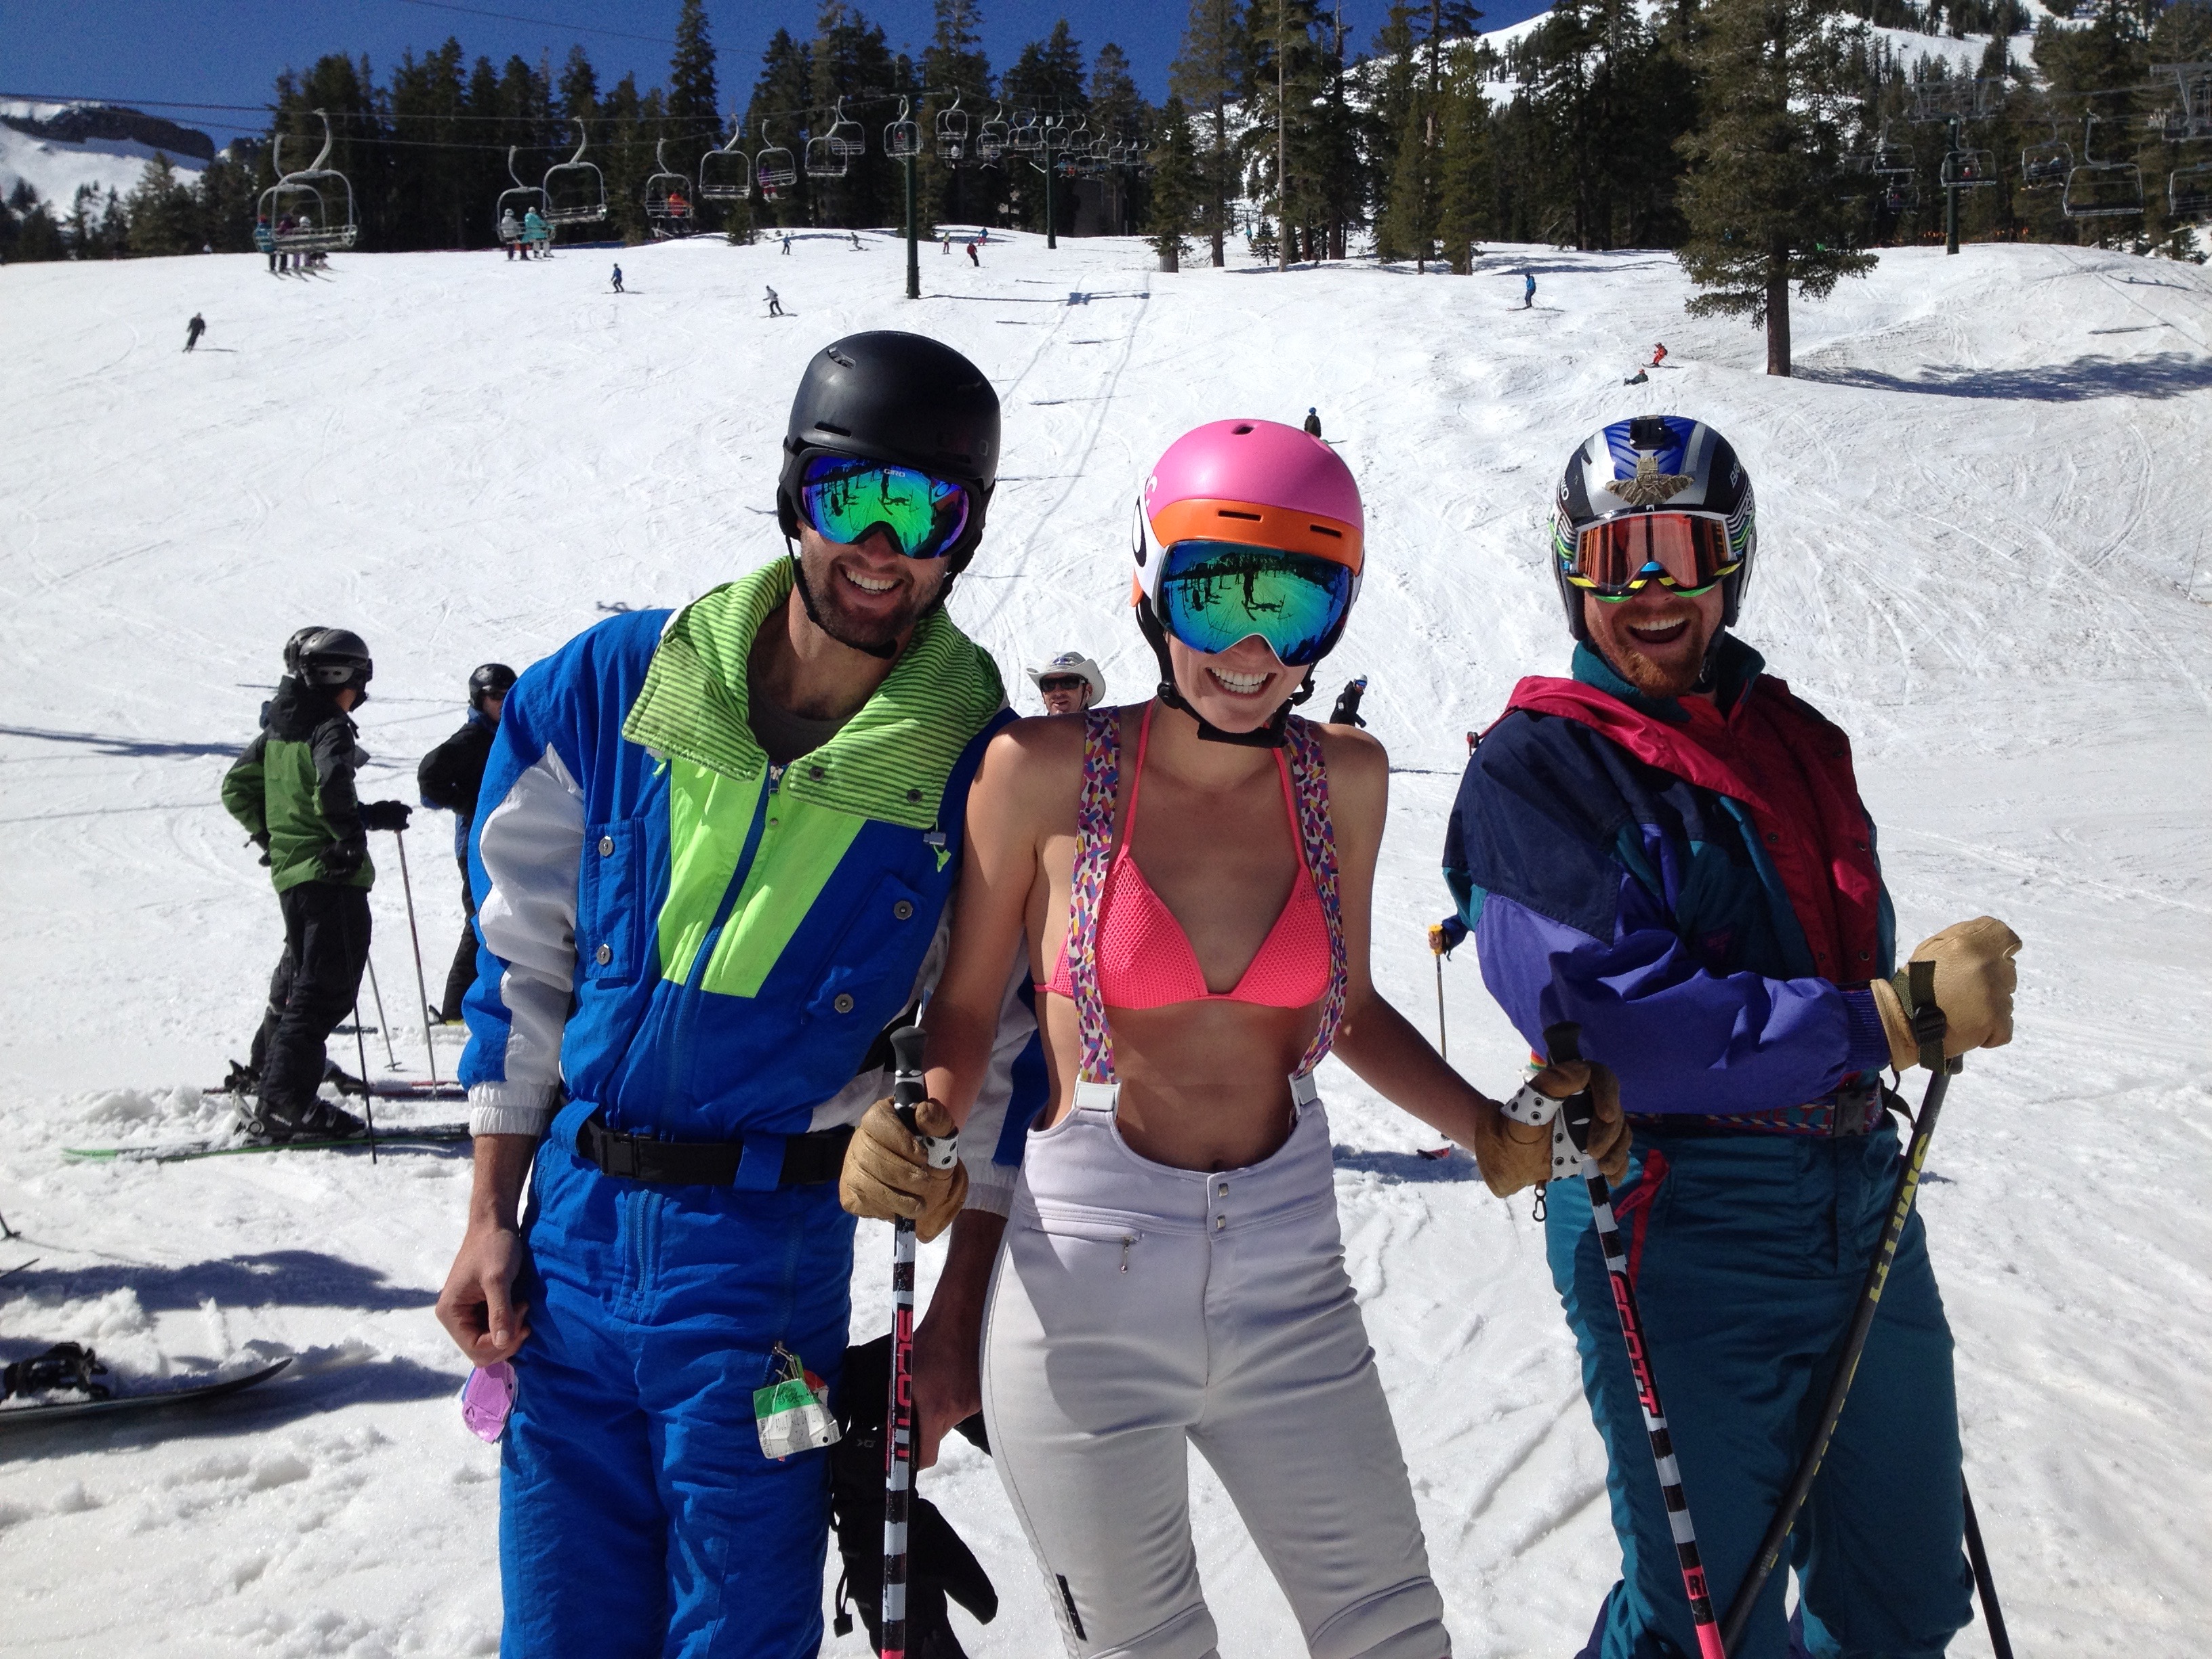 Friendly locals at Kirkwood, CA yesterday. photo: snowbrains.com